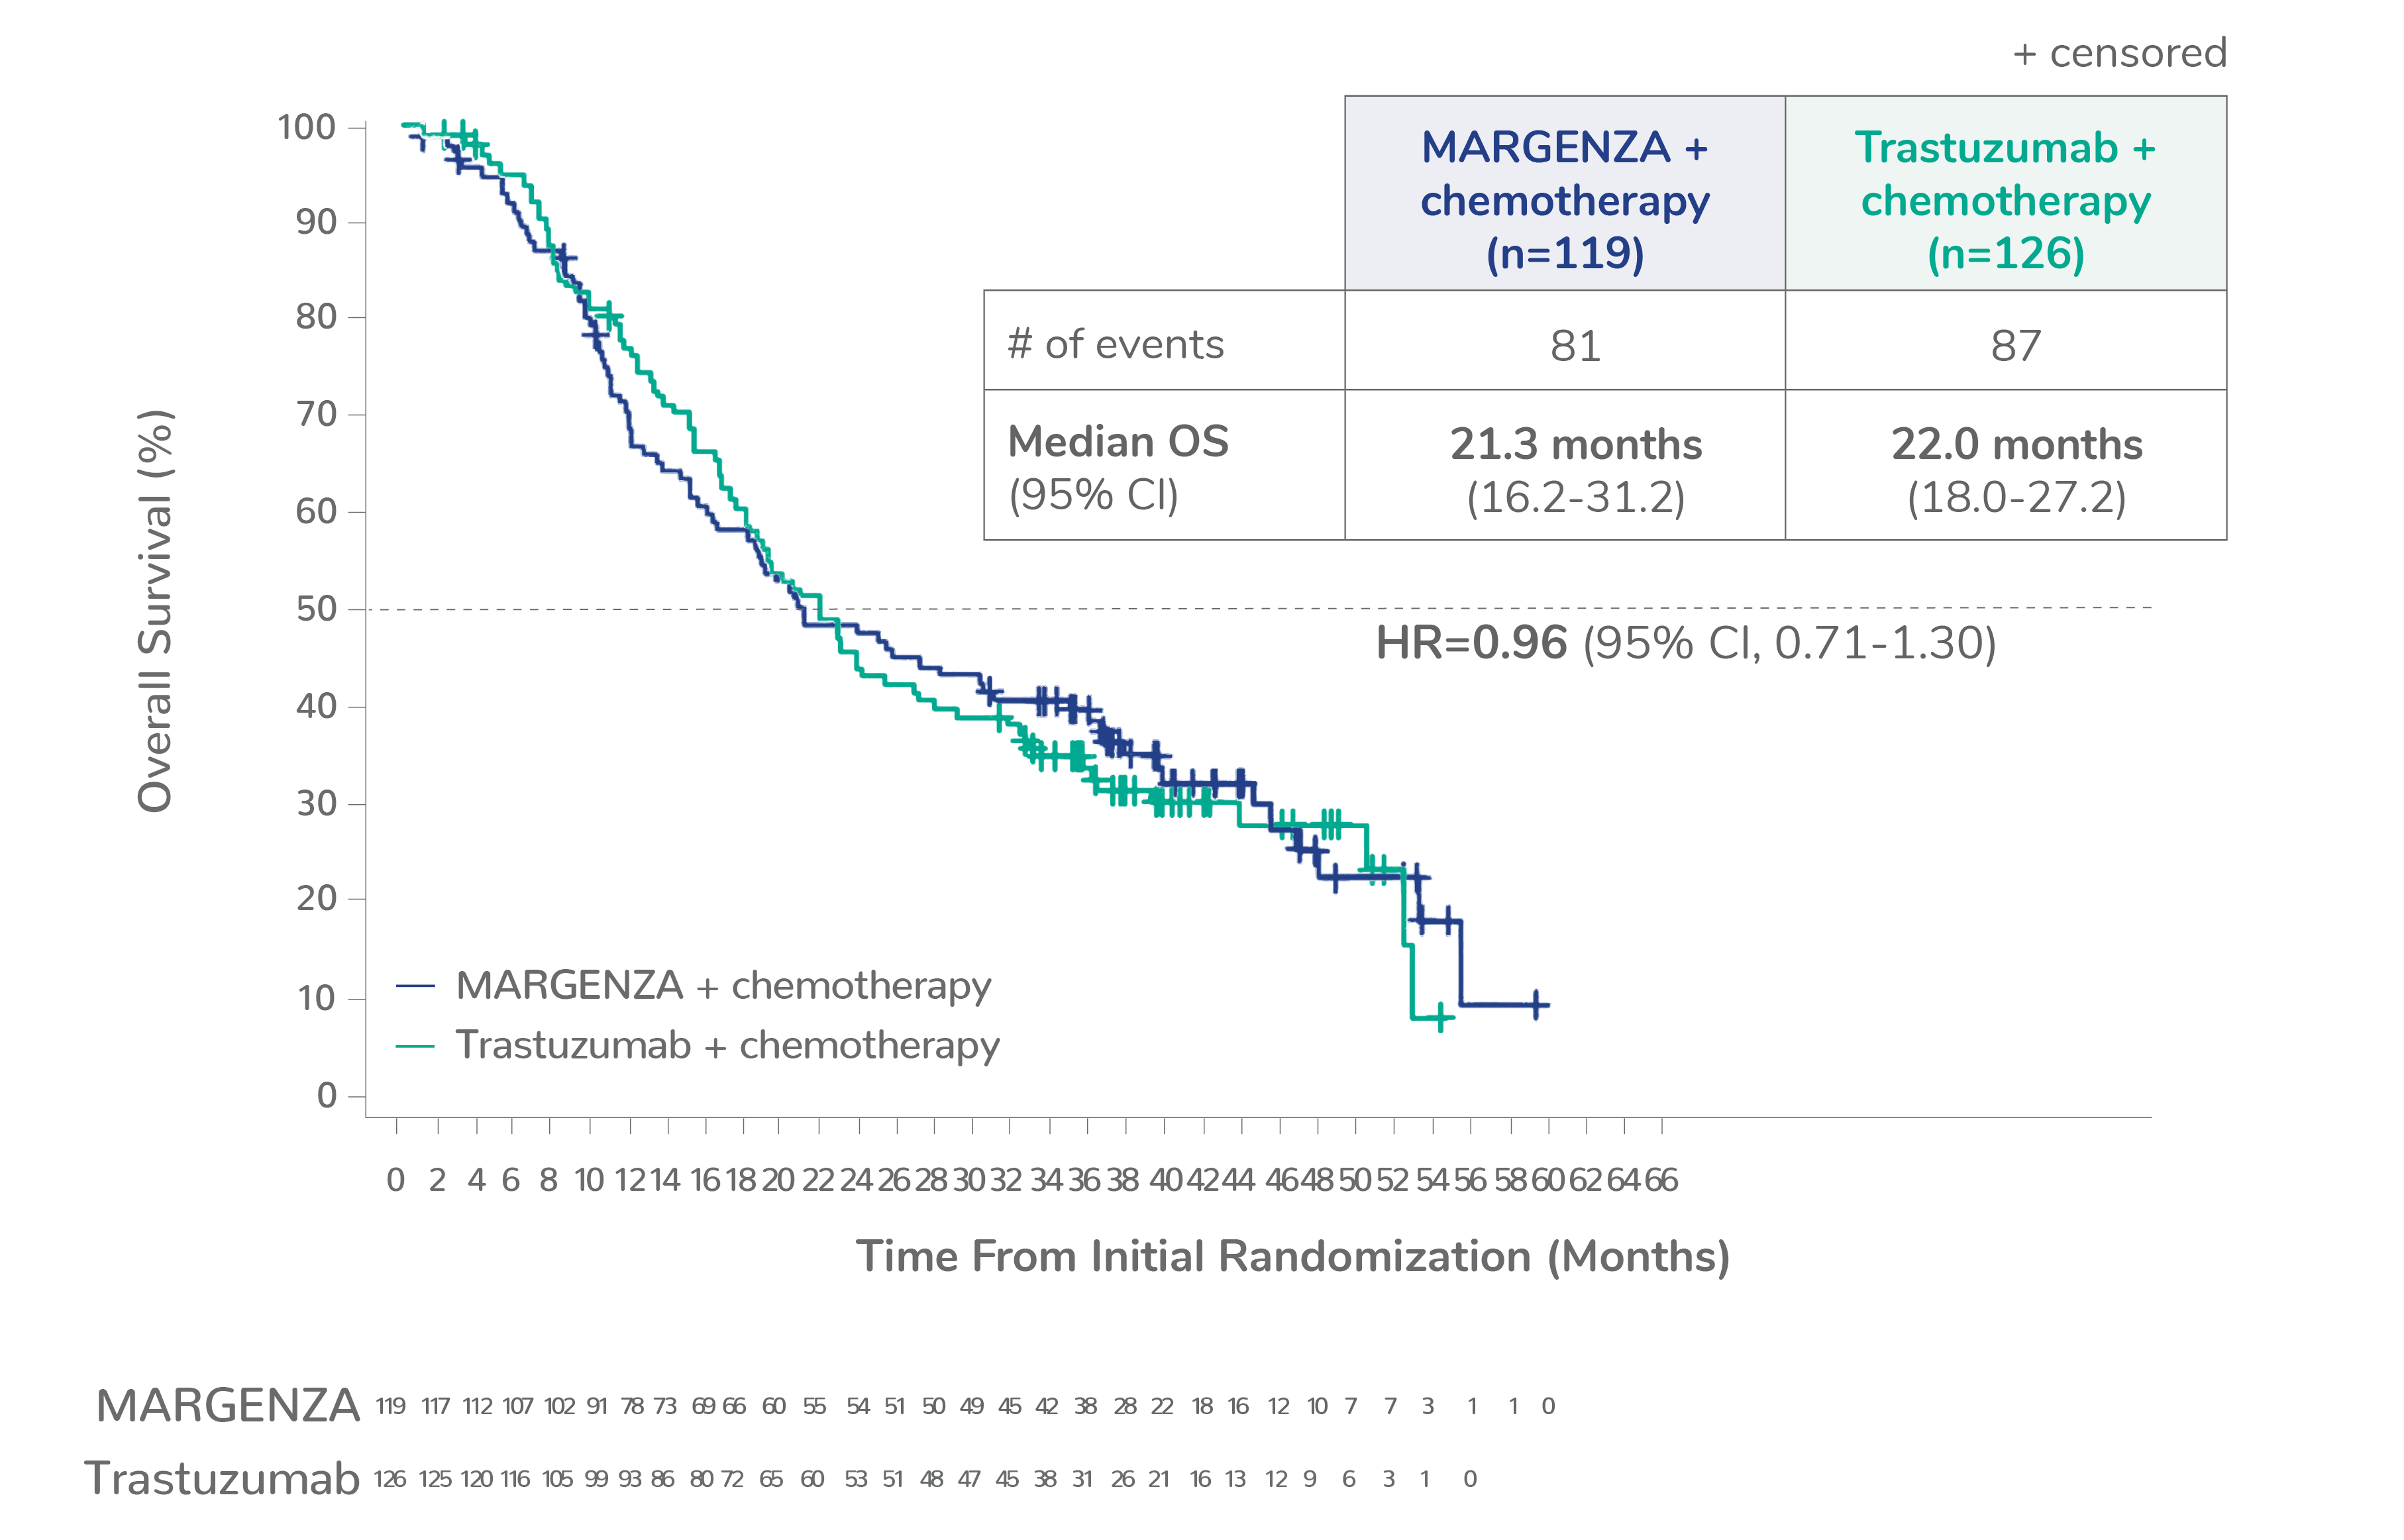 Kaplan Meyer curve showing median overall survival for CD16A FV genotype of 21.3 months for MARGENZA plus chemotherapy in 119 patients compared to 22.0 months for trastuzumab plus chemotherapy in 126 patients. The hazard ratio was 0.96. 